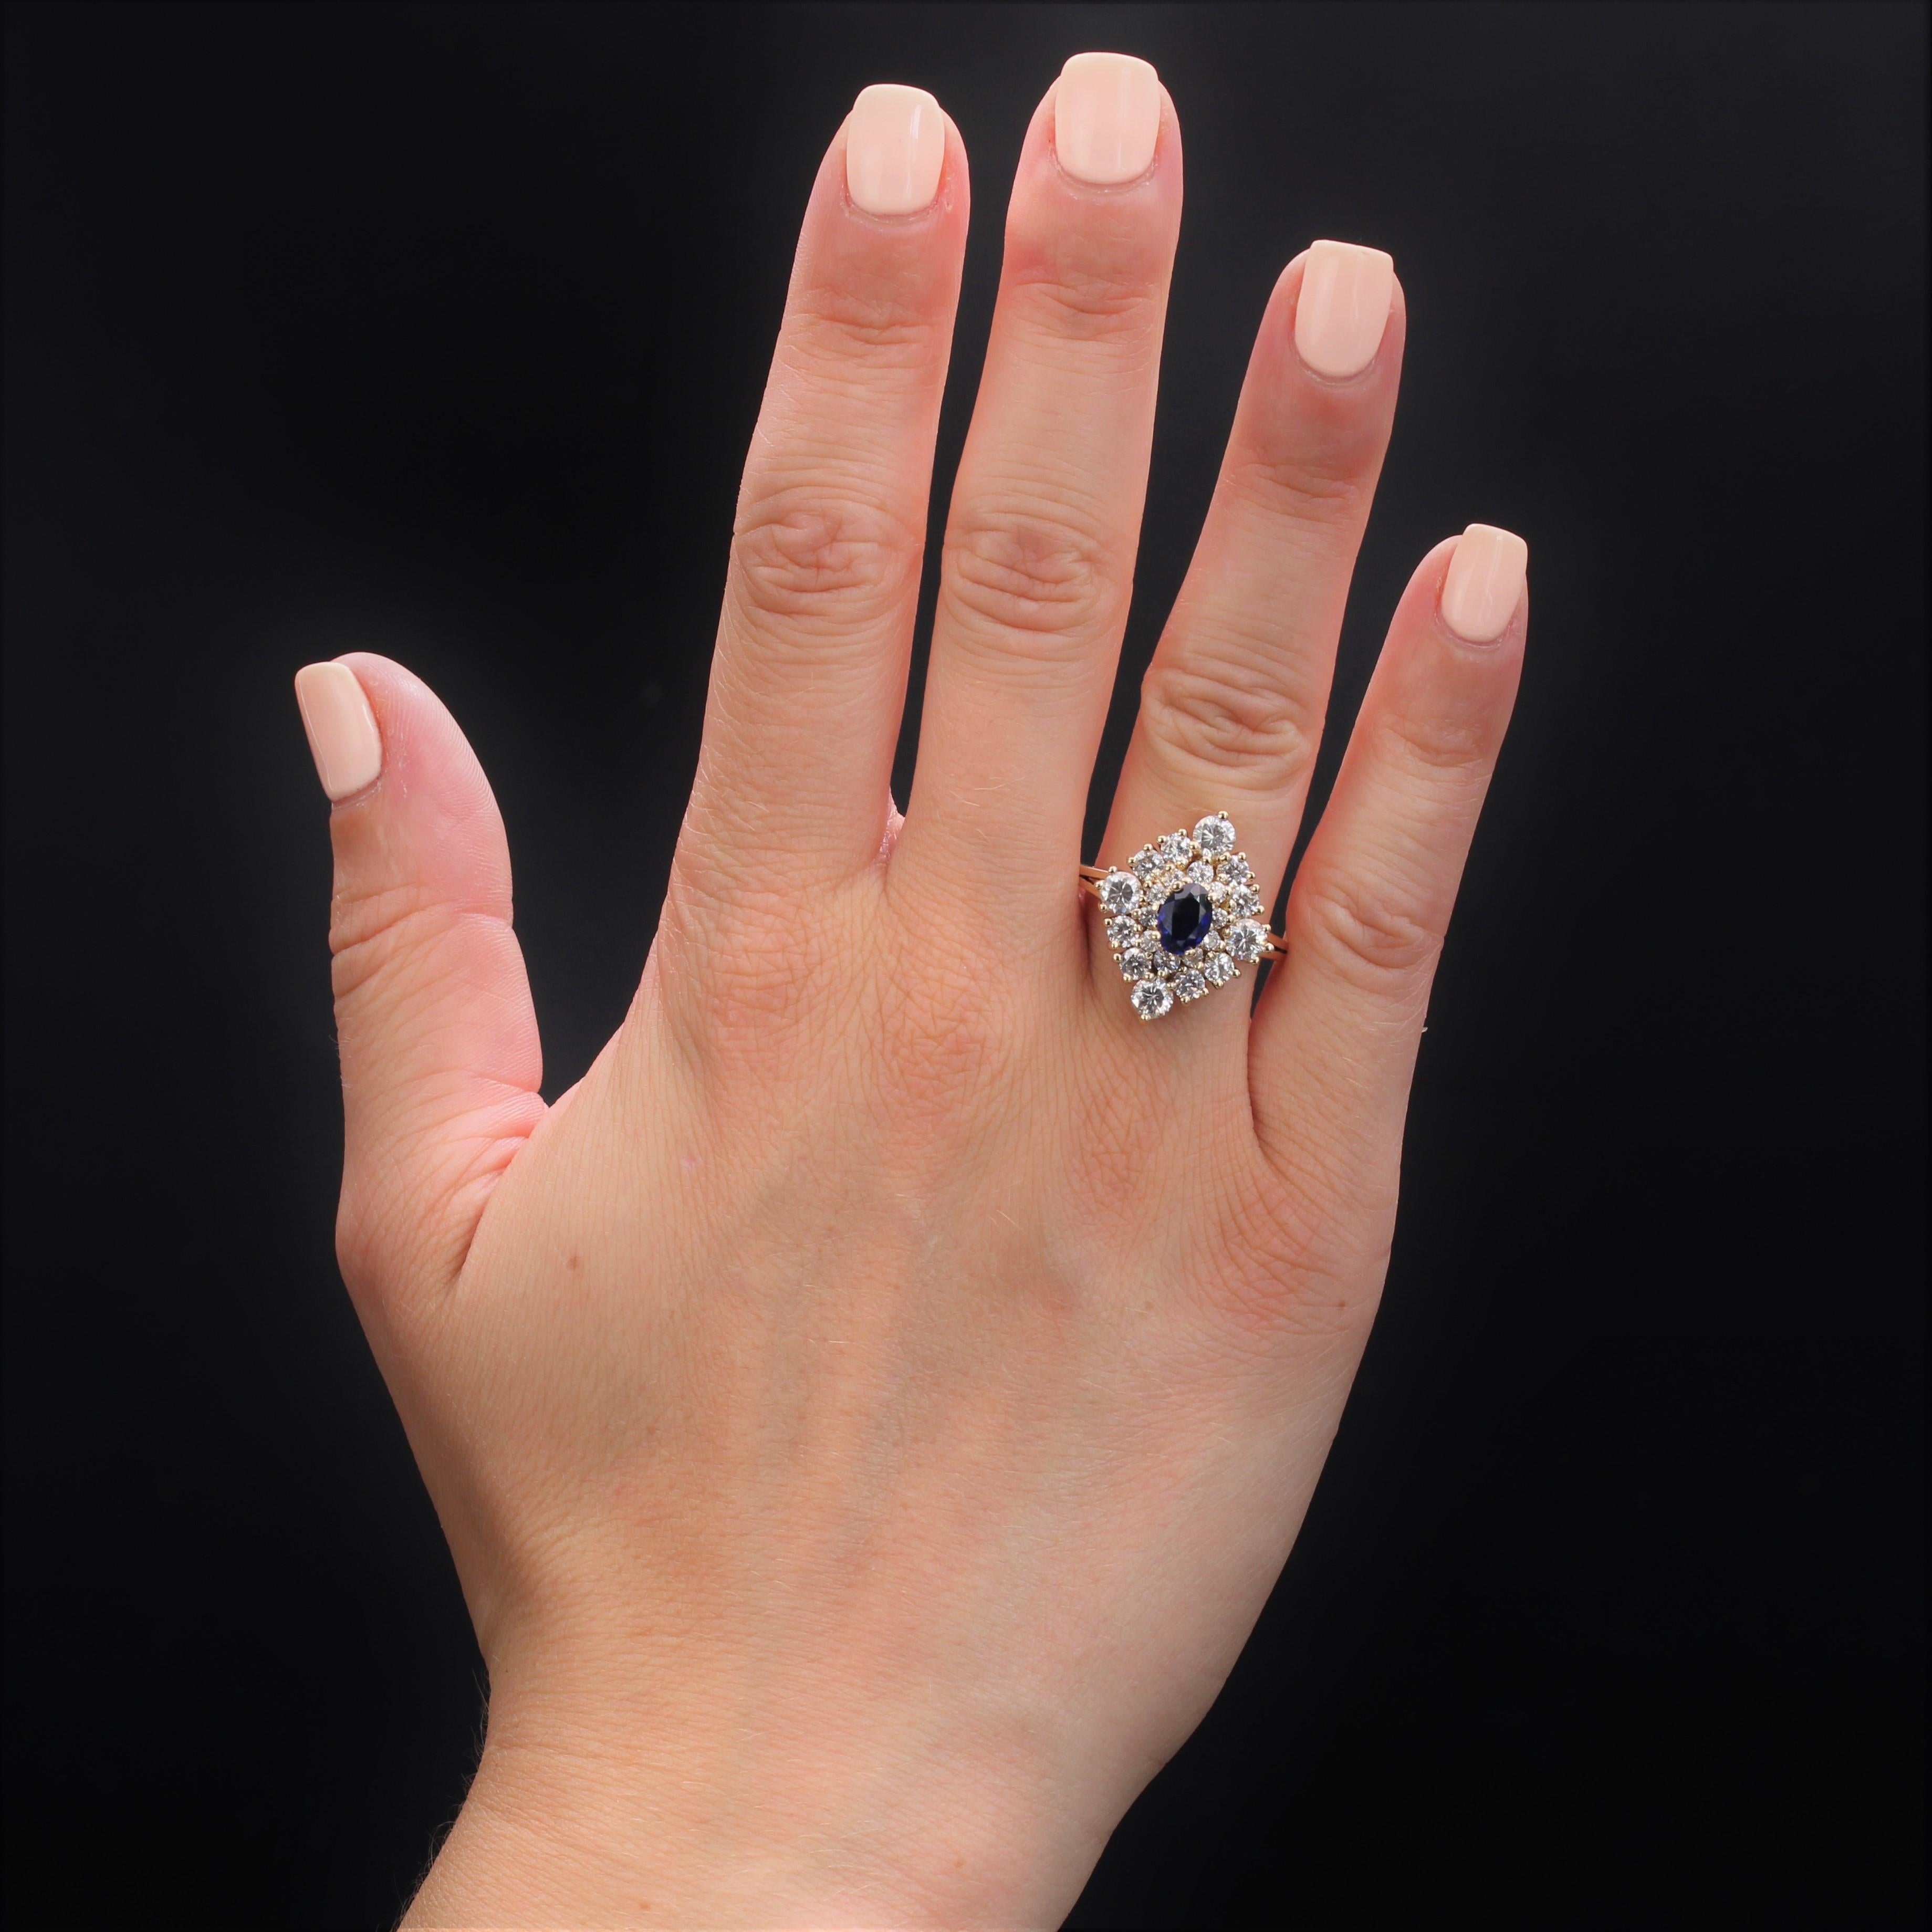 Ring in 18 karat yellow gold.
A handsome volume, this diamond-shaped second-hand ring is entirely set with a double row of brilliant-cut white sapphires held in claws, those at the 4 cardinal points being larger. In the center, an oval synthetic